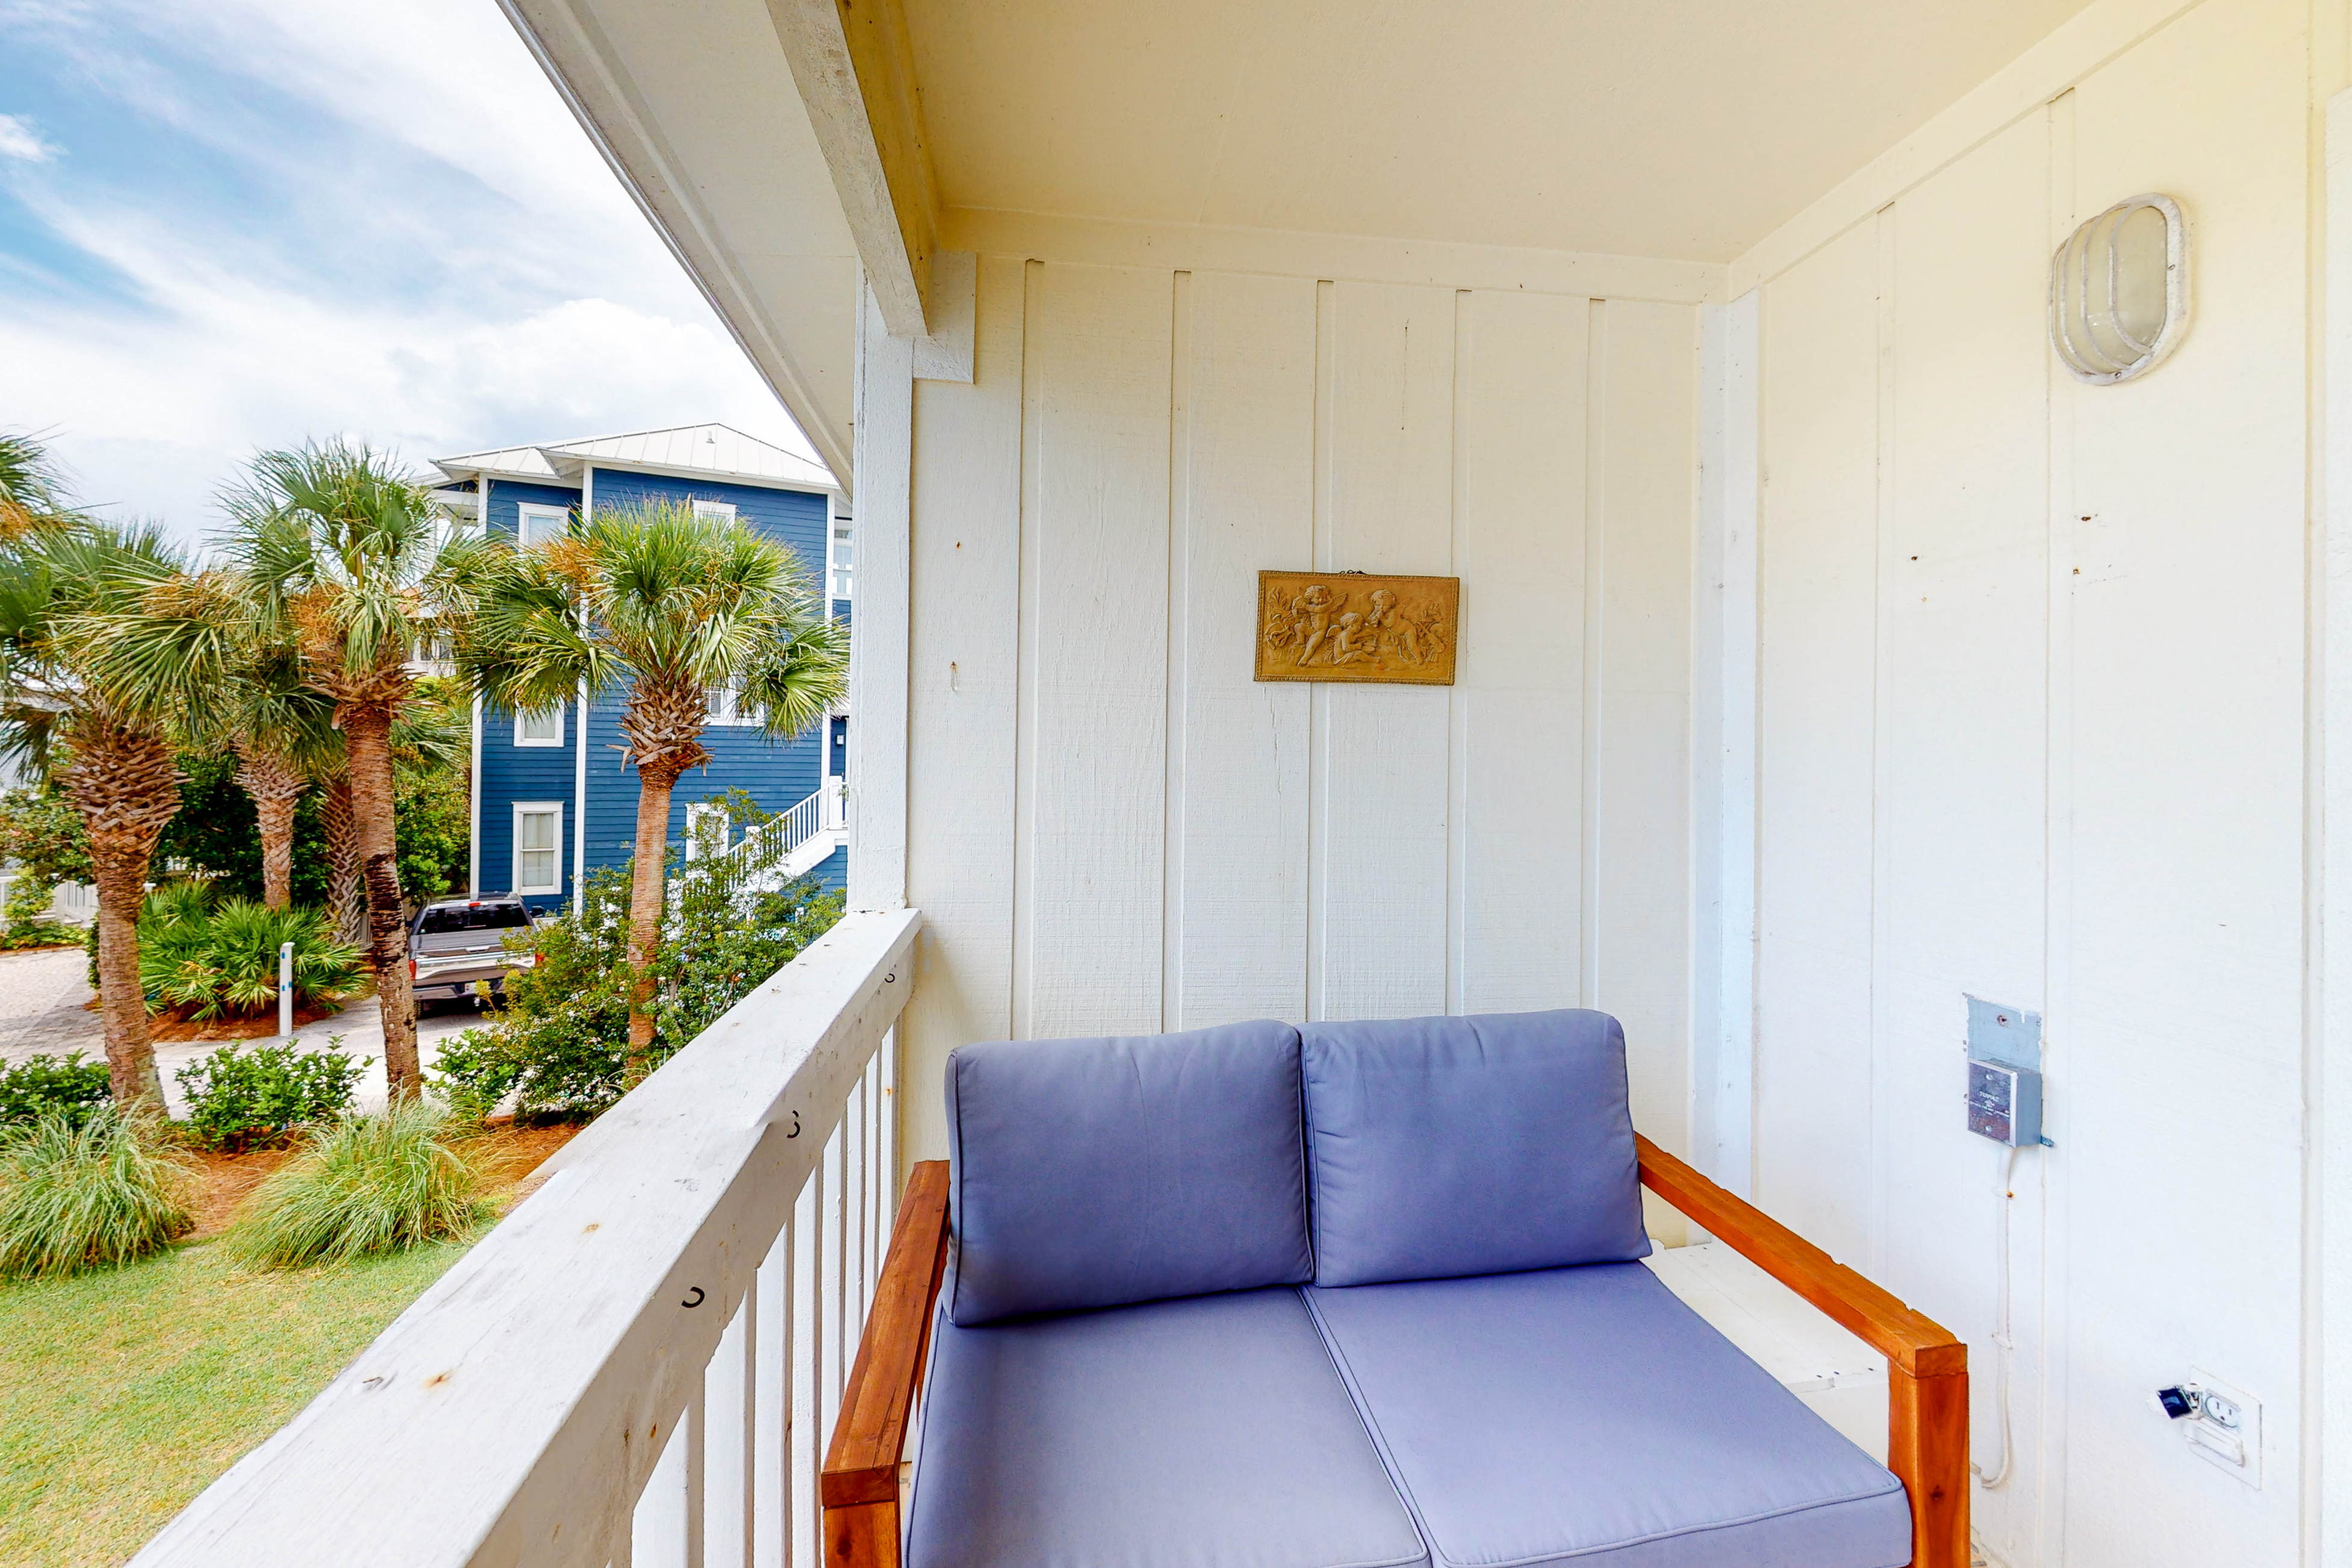 Seaside Serenity - Beacons 9 House / Cottage rental in 30a Beach House Rentals in Highway 30-A Florida - #3